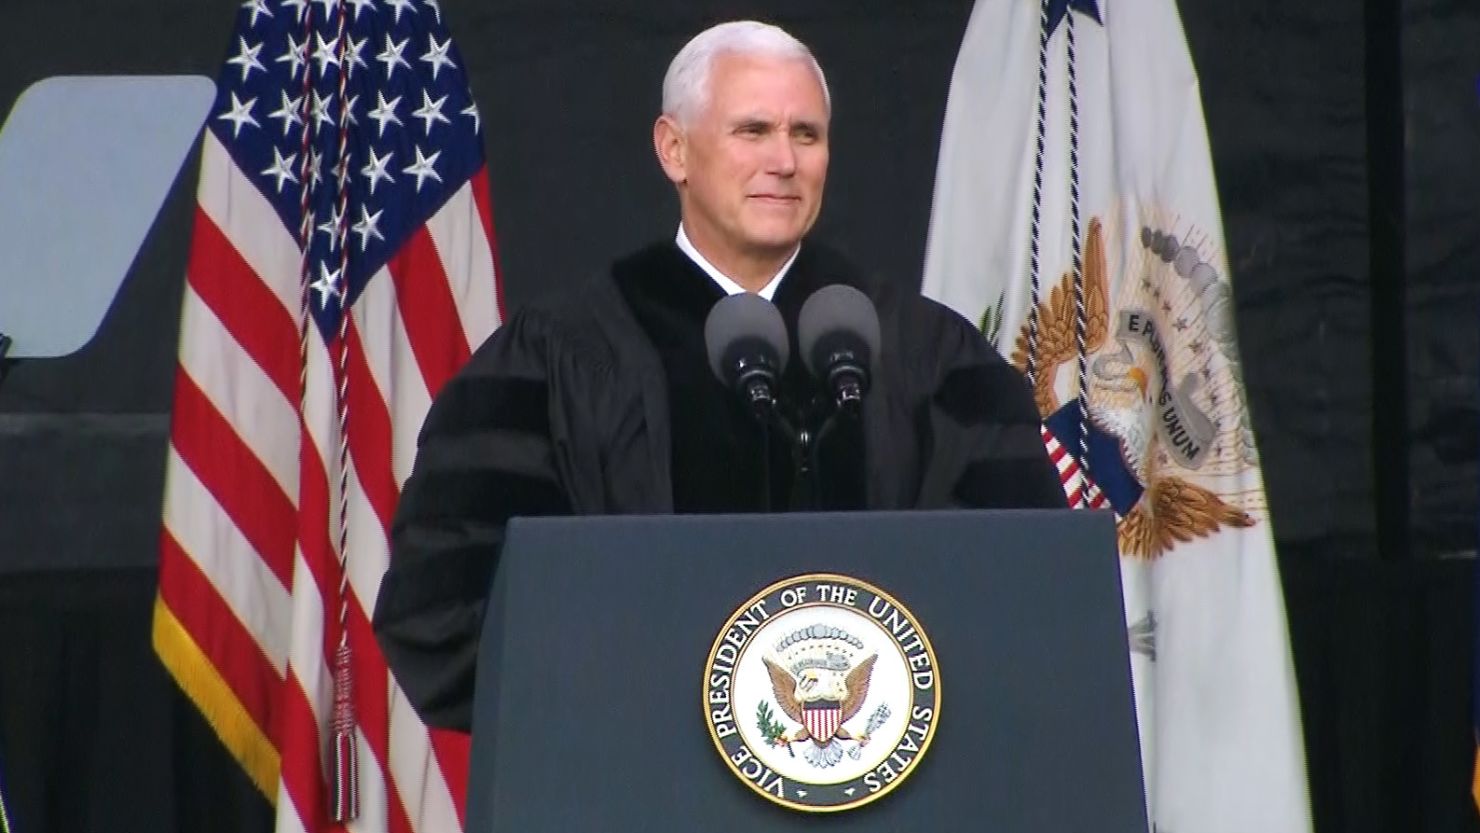 Vice President Mike Pence speaks at the Grove City College graduation ceremony on Saturday, May 20, 2017.